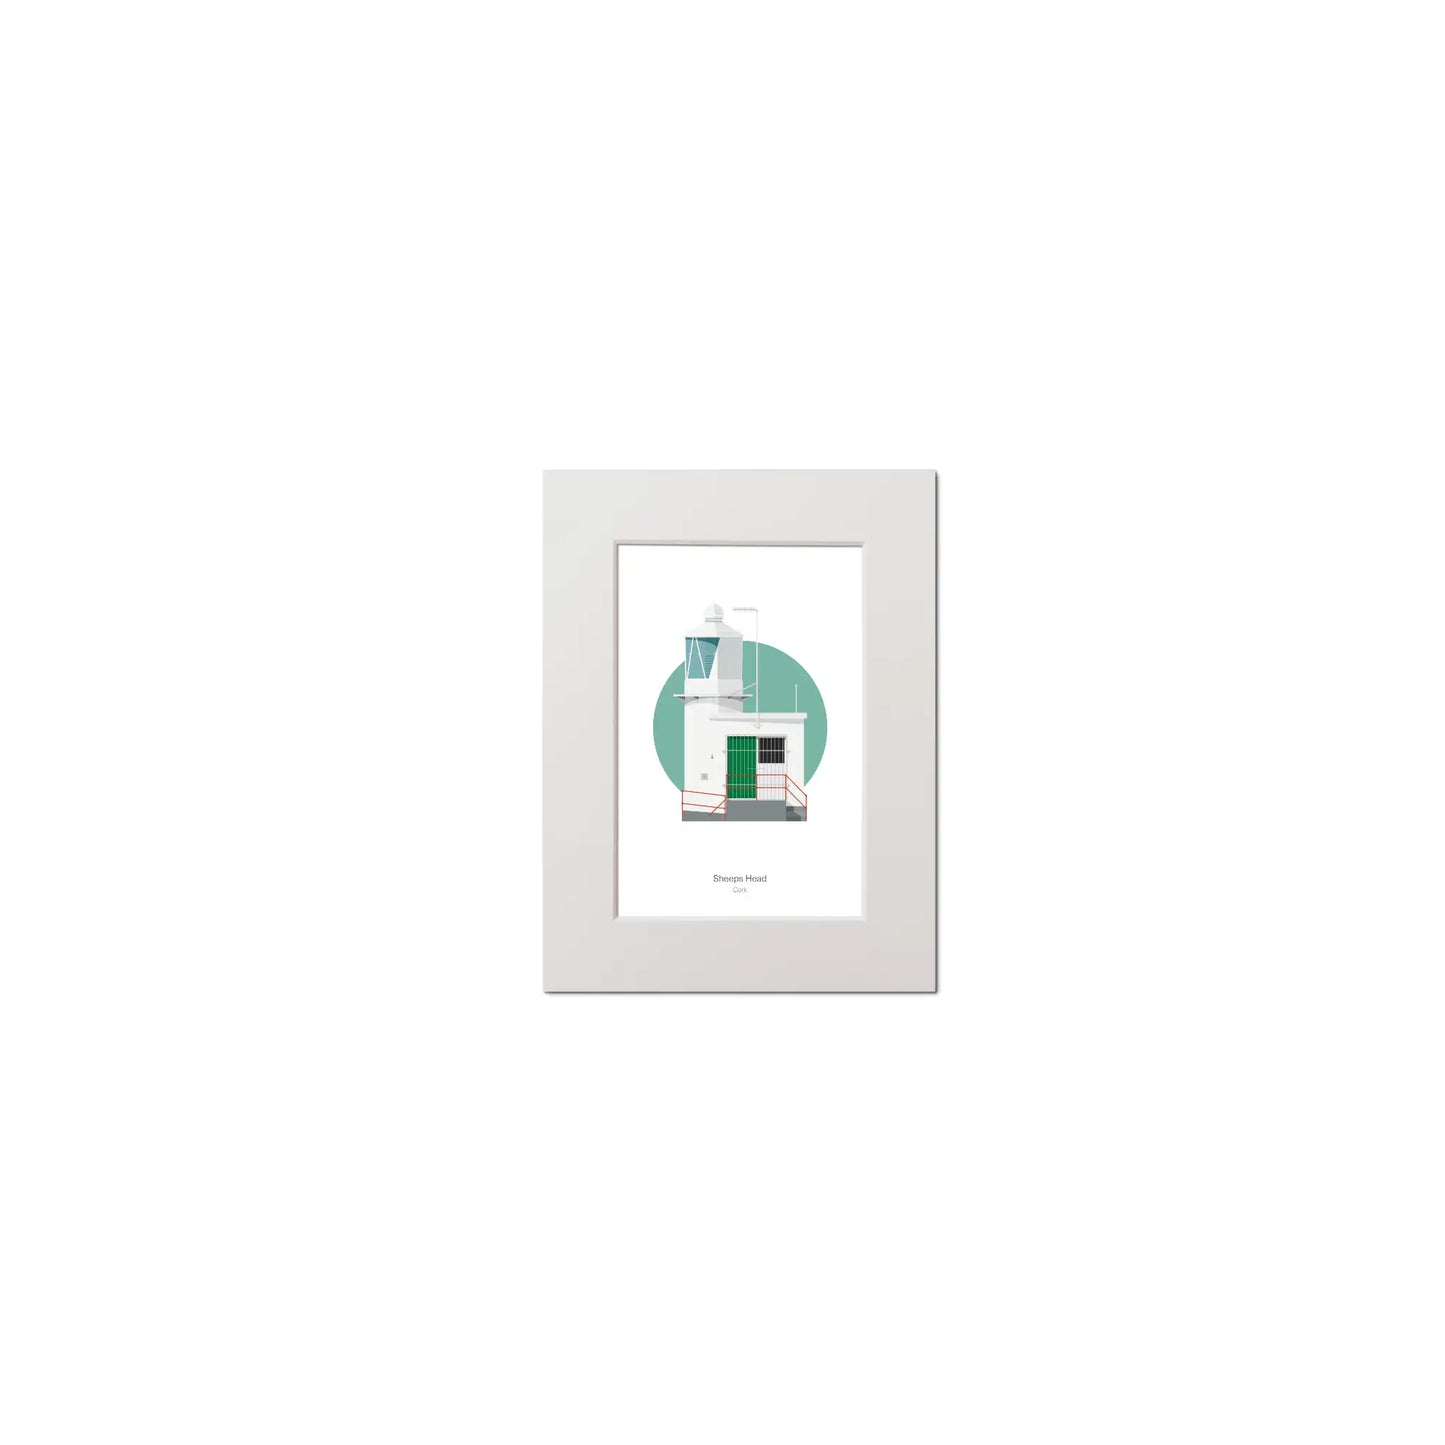 Contemporary graphic illustration of Sheeps Head lighthouse on a white background inside light blue square, mounted and measuring 15x20cm.